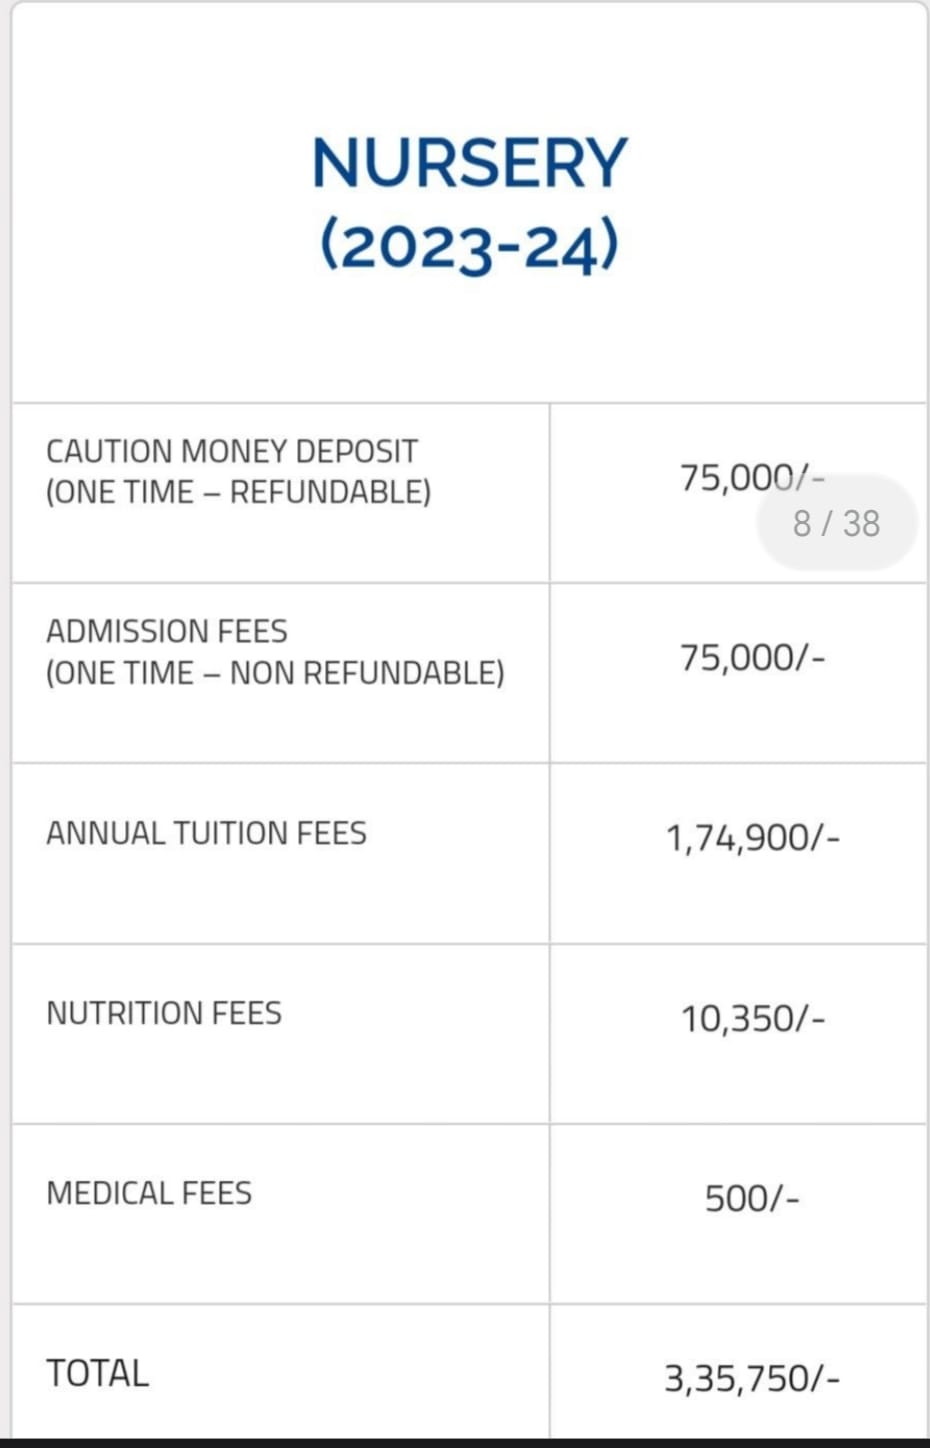 Fee structure for The Somaiya School